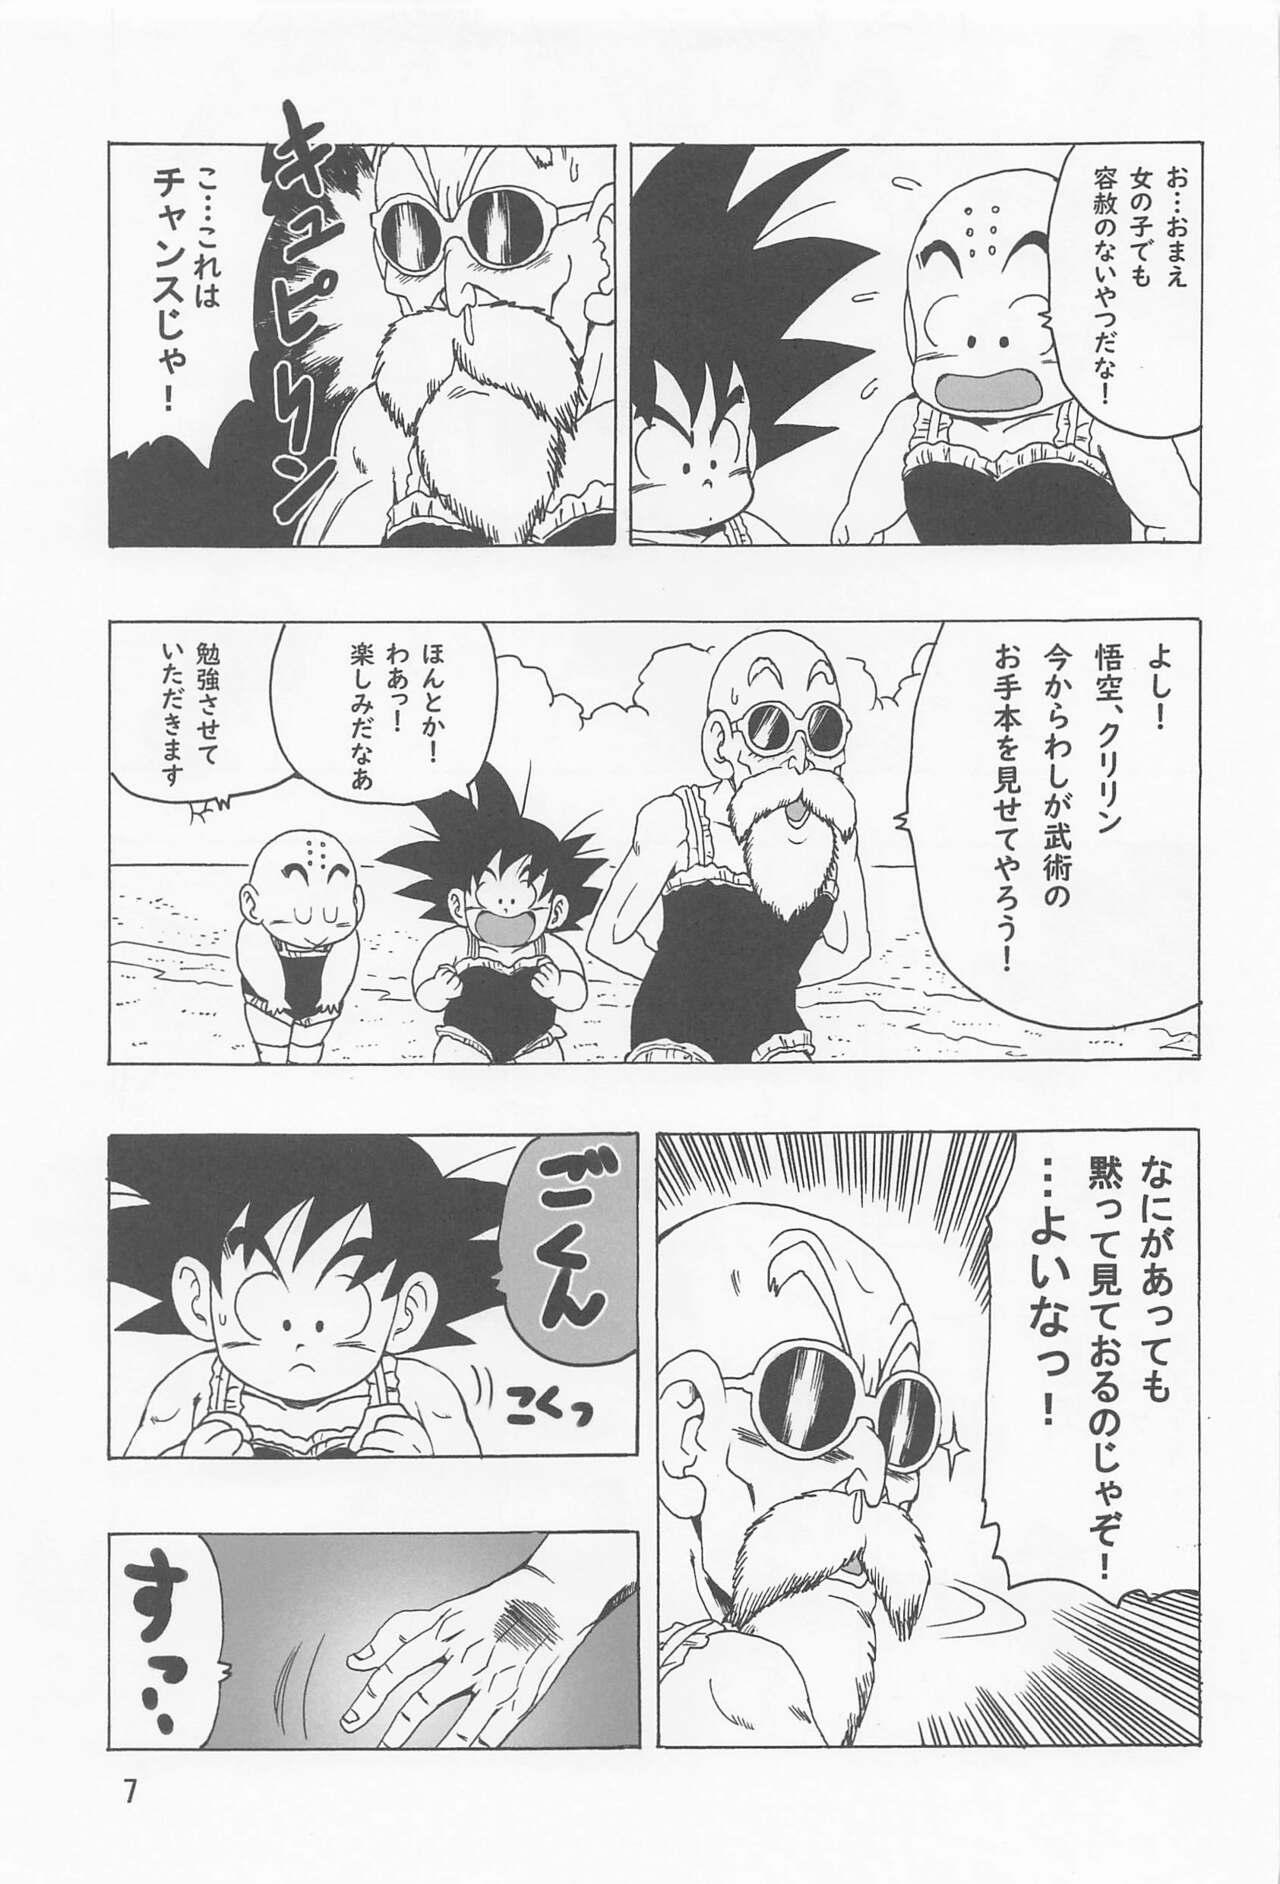 Fat Pussy Episode of Lunch 1 - Dragon ball Amateurs - Page 8